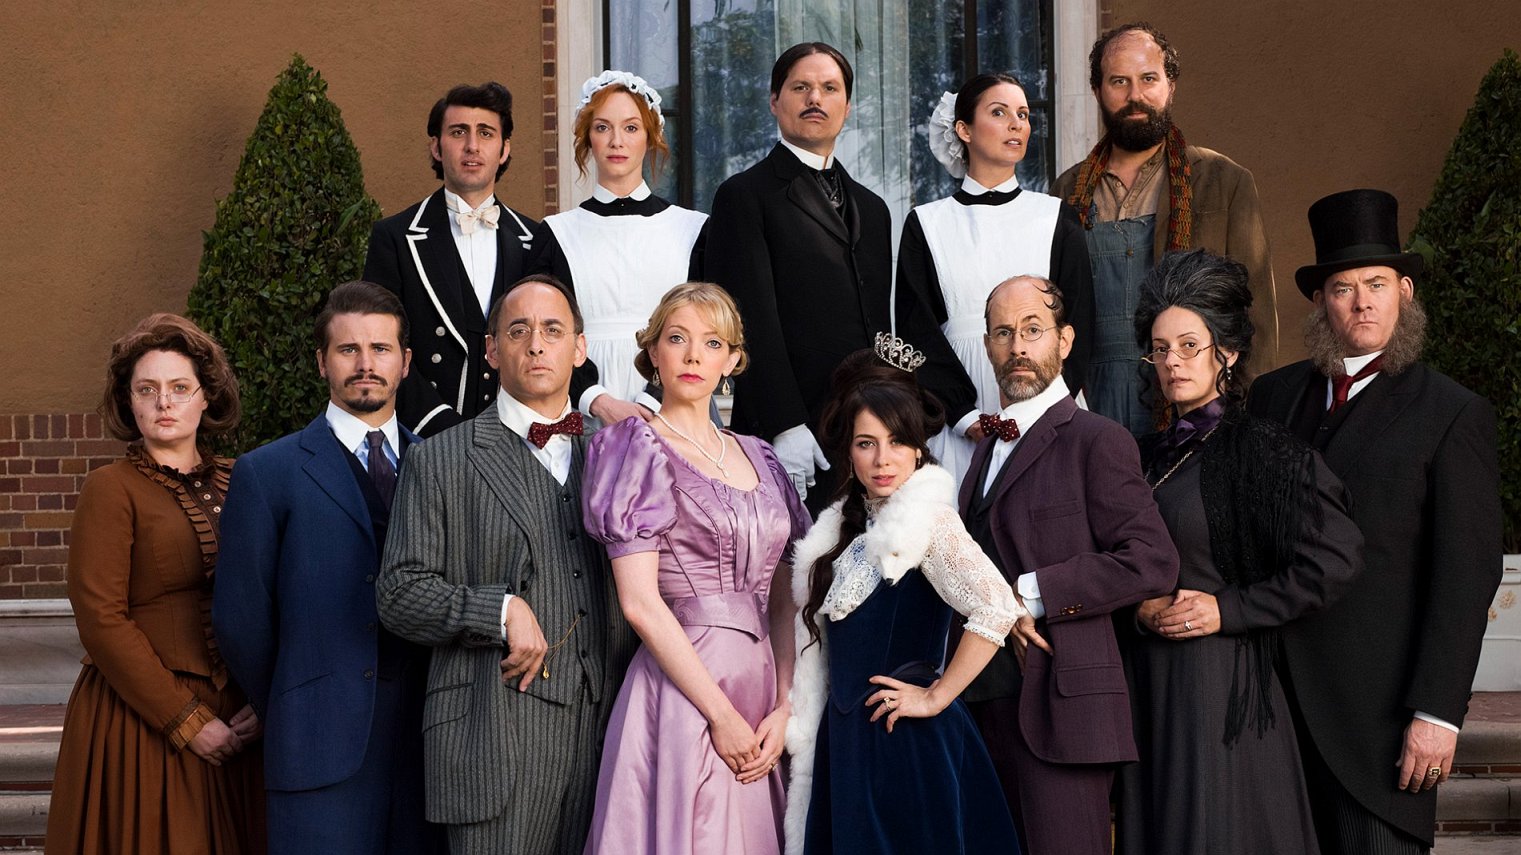 cast of Another Period season 2